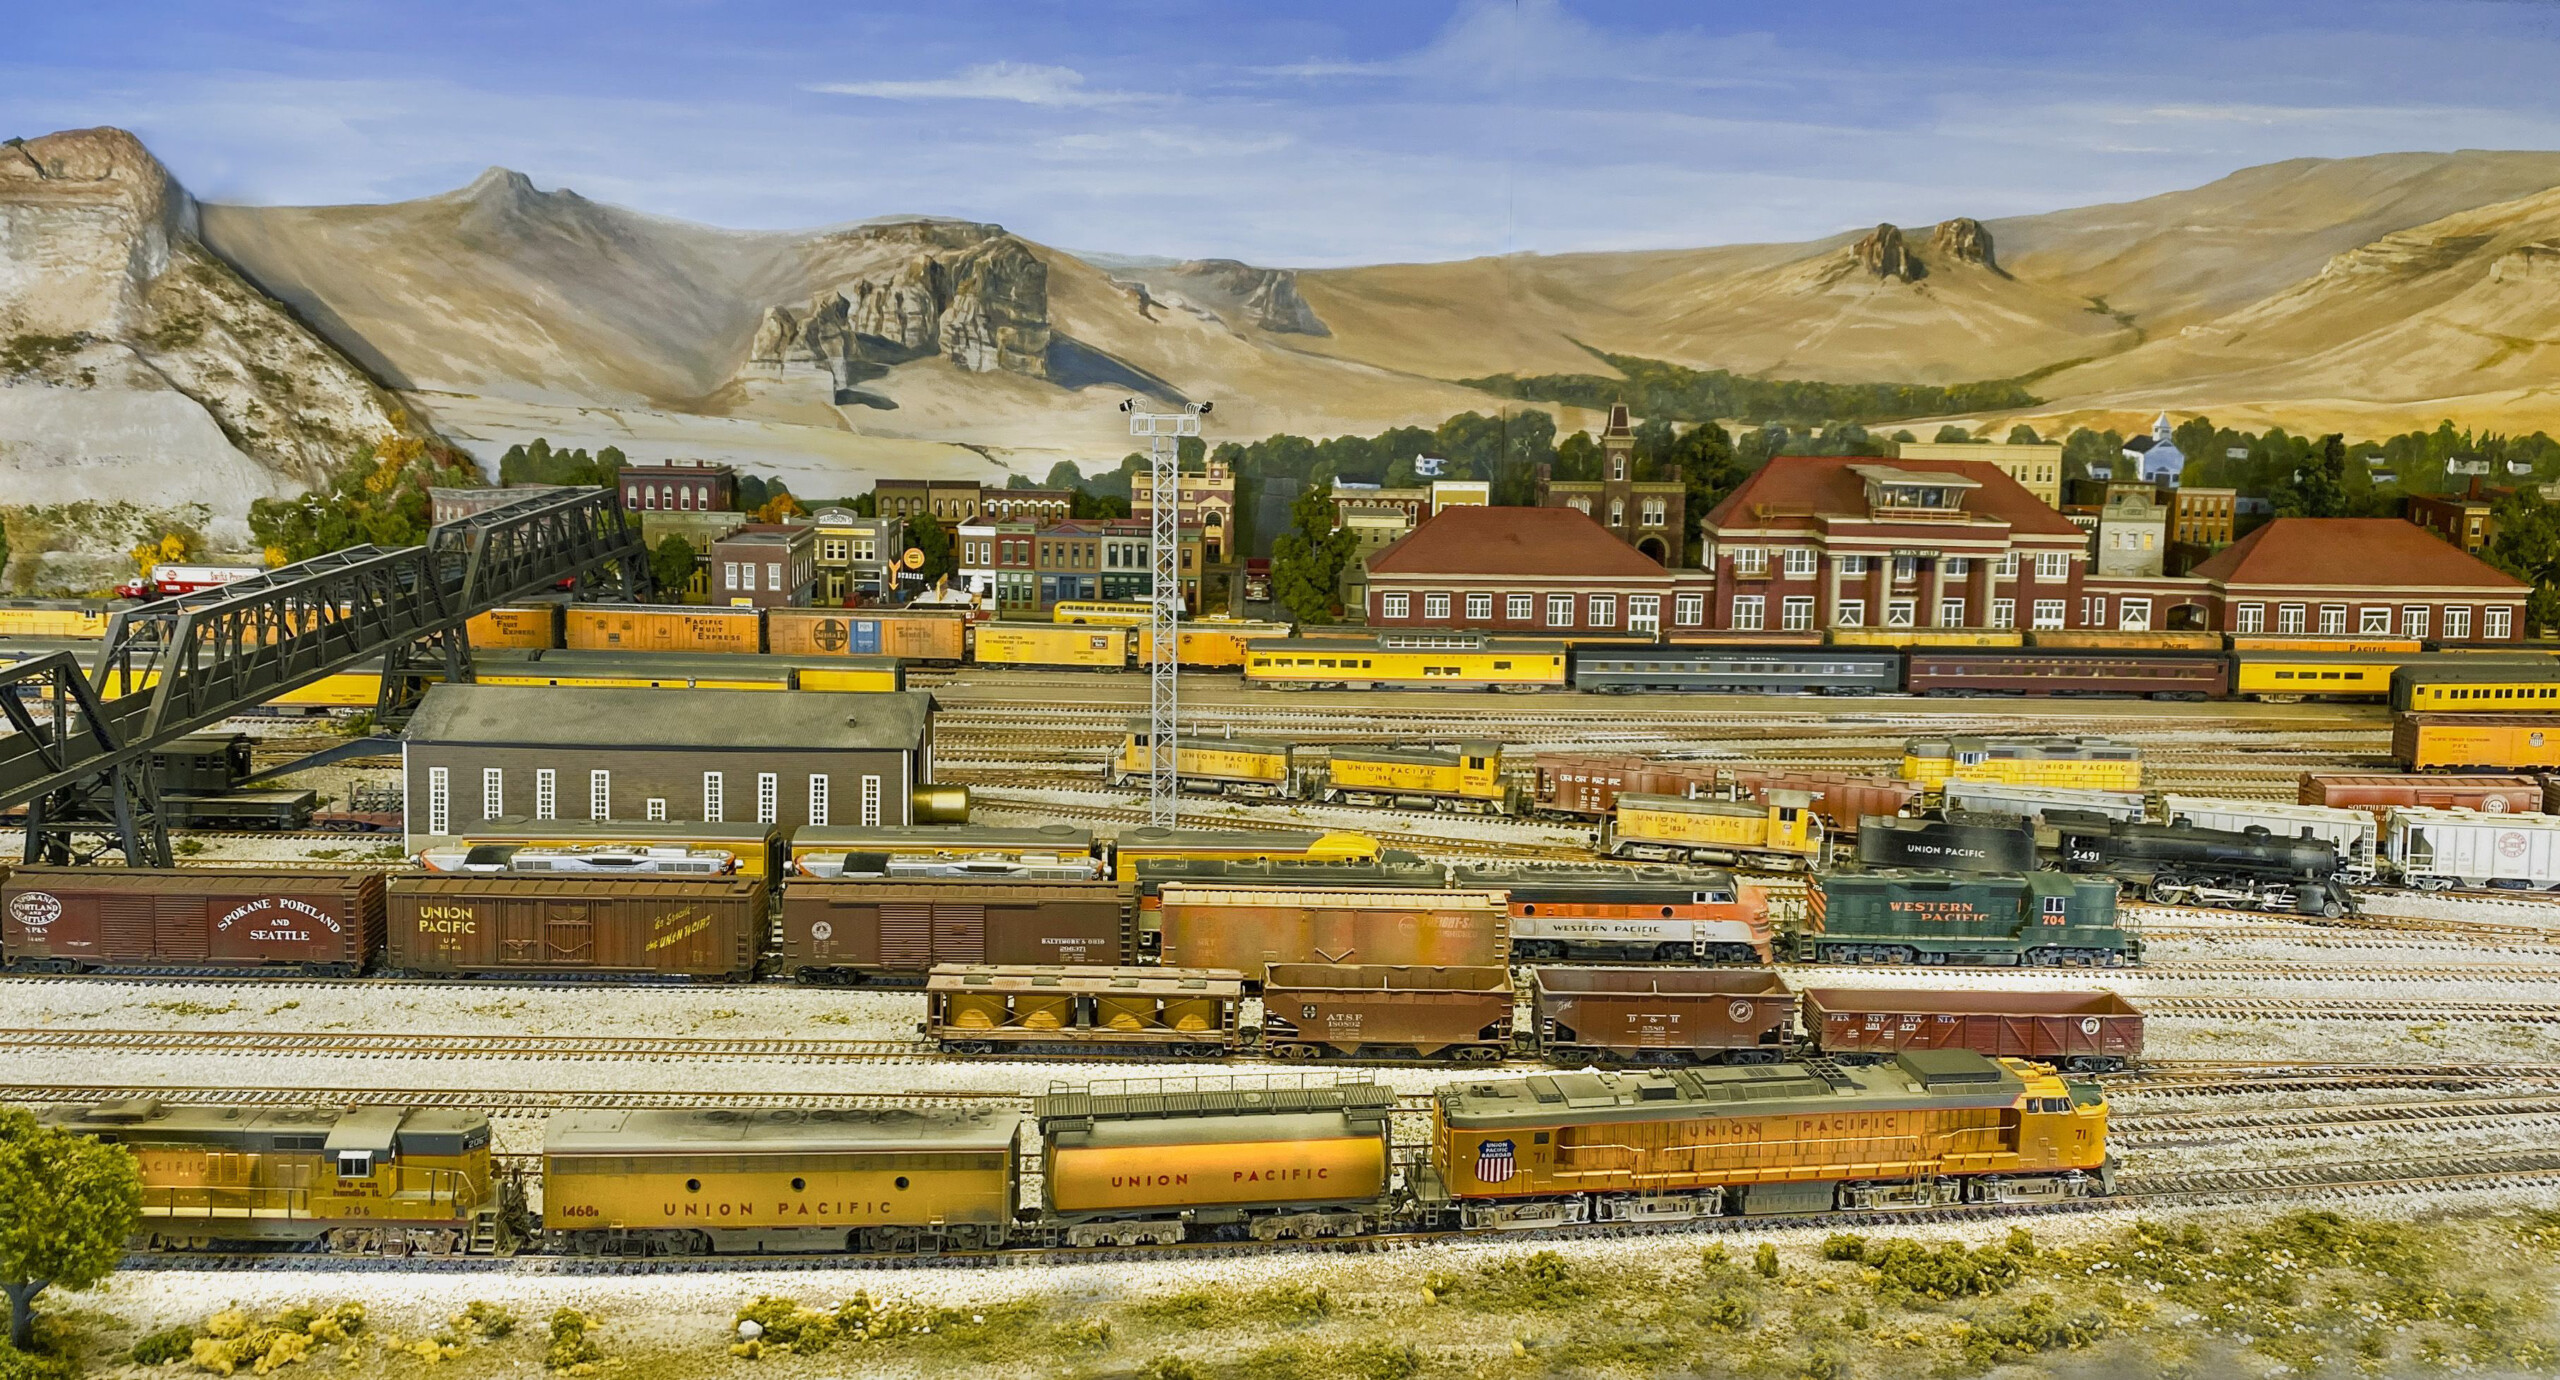 The Green River layout in HO scale: An image of a model railroad layout, with trains in the foreground and structures in the background